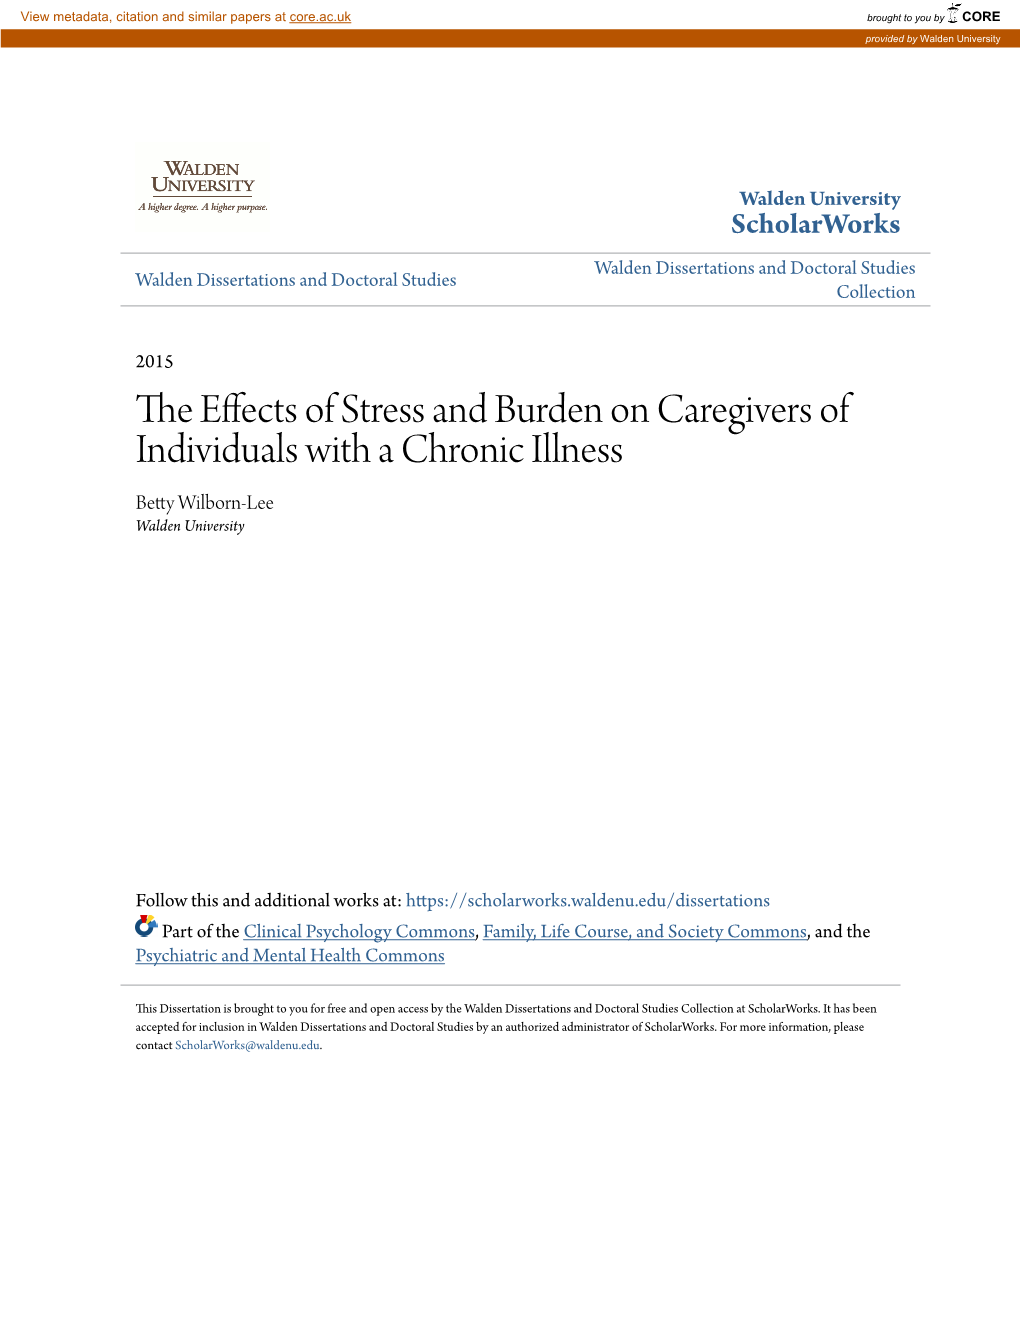 The Effects of Stress and Burden on Caregivers of Individuals